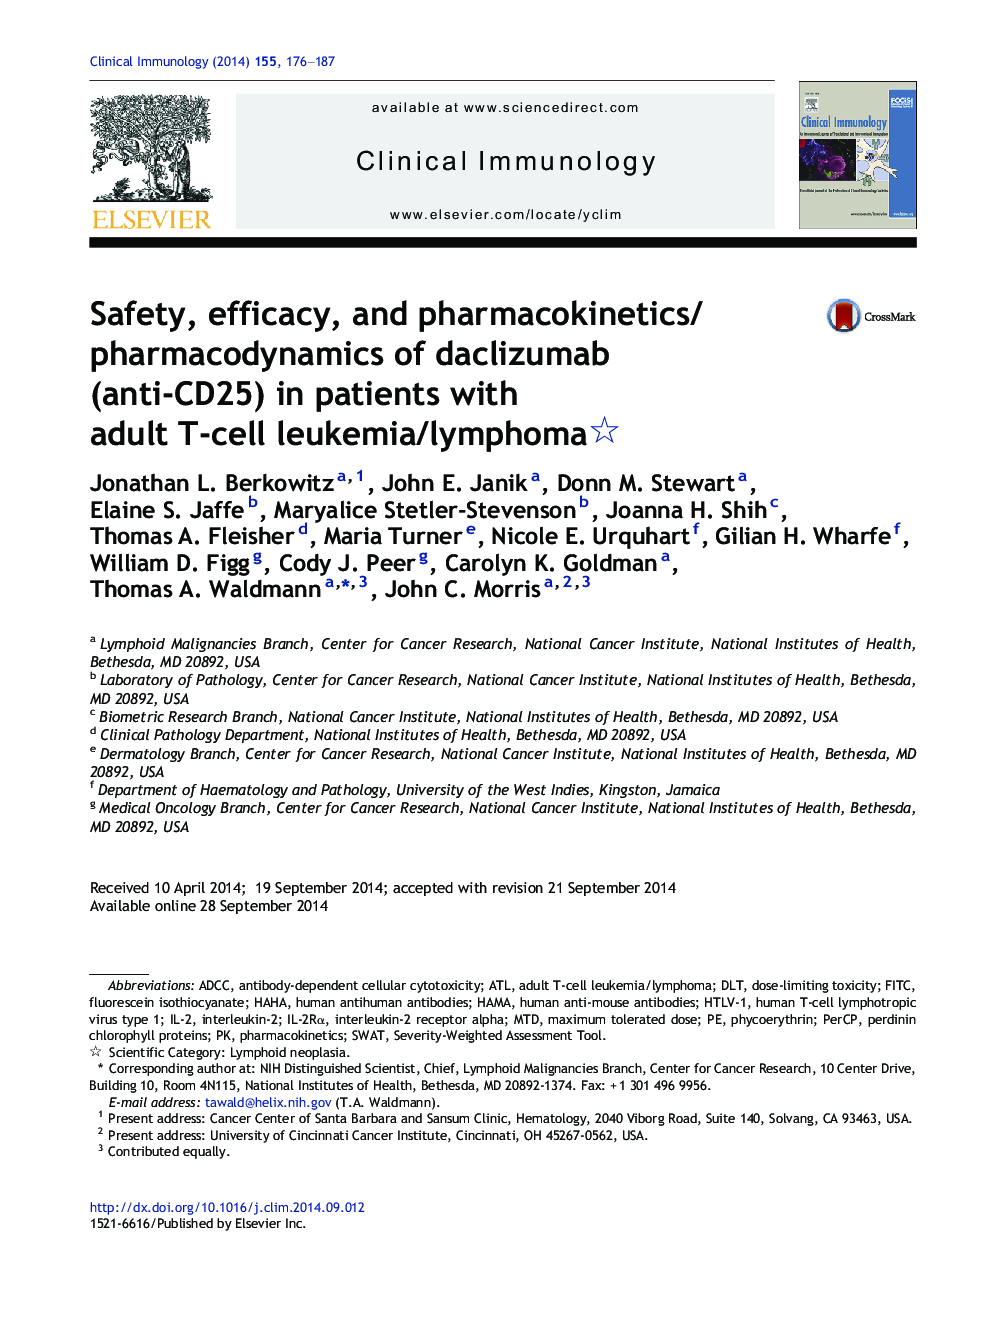 Safety, efficacy, and pharmacokinetics/pharmacodynamics of daclizumab (anti-CD25) in patients with adult T-cell leukemia/lymphoma 